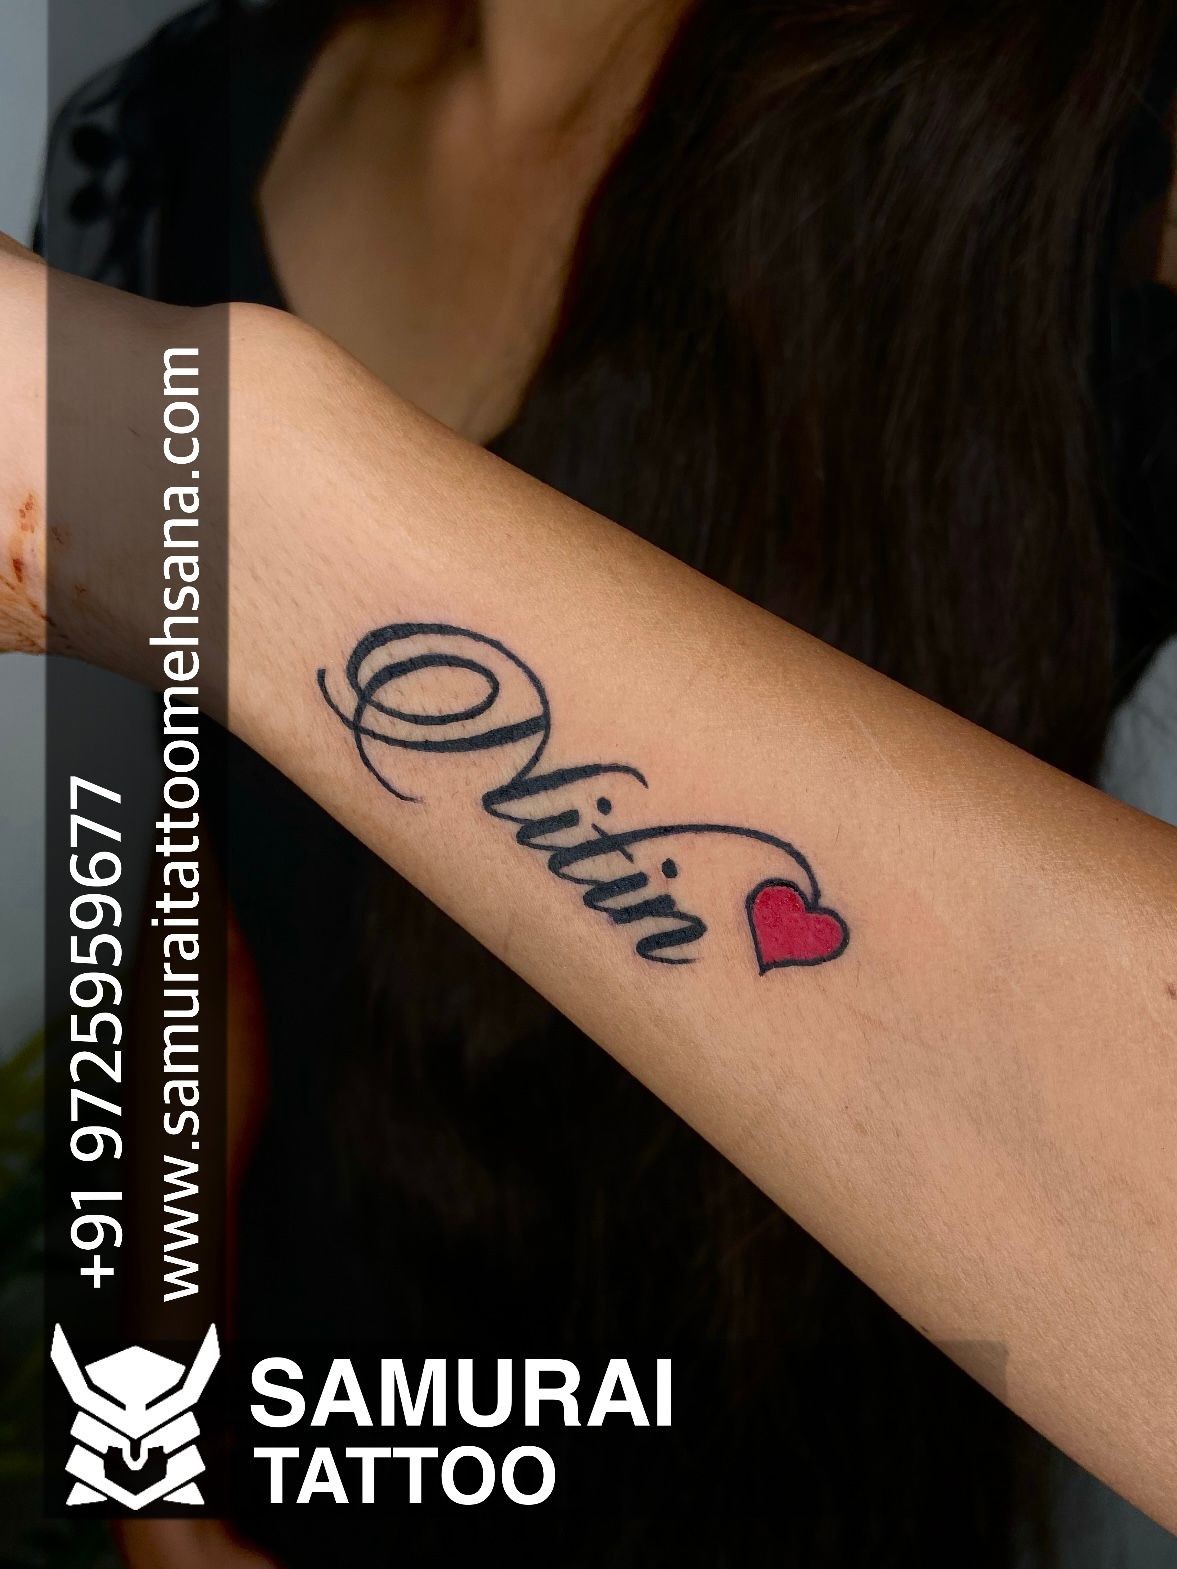 anikettattooartist  V and P name Tattoo  The MemoryS Tattoo art studio  Tattoo by  Aniket Bhagone aniketartist anikettattooartist  You can  get your Tattoo Done by a Professional in a